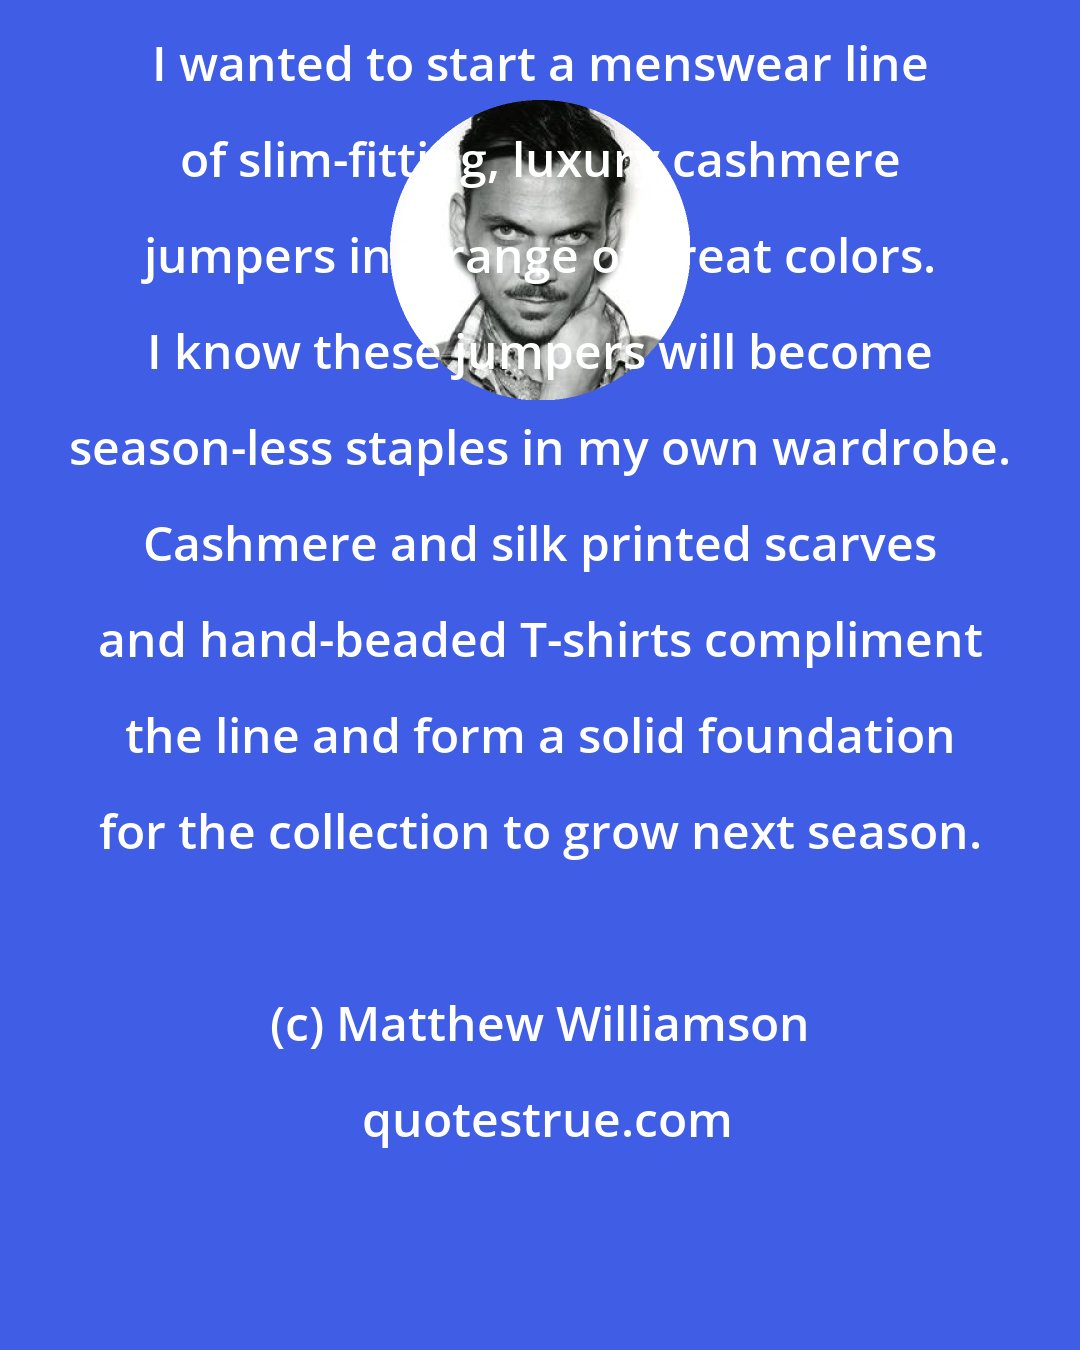 Matthew Williamson: I wanted to start a menswear line of slim-fitting, luxury cashmere jumpers in a range of great colors. I know these jumpers will become season-less staples in my own wardrobe. Cashmere and silk printed scarves and hand-beaded T-shirts compliment the line and form a solid foundation for the collection to grow next season.